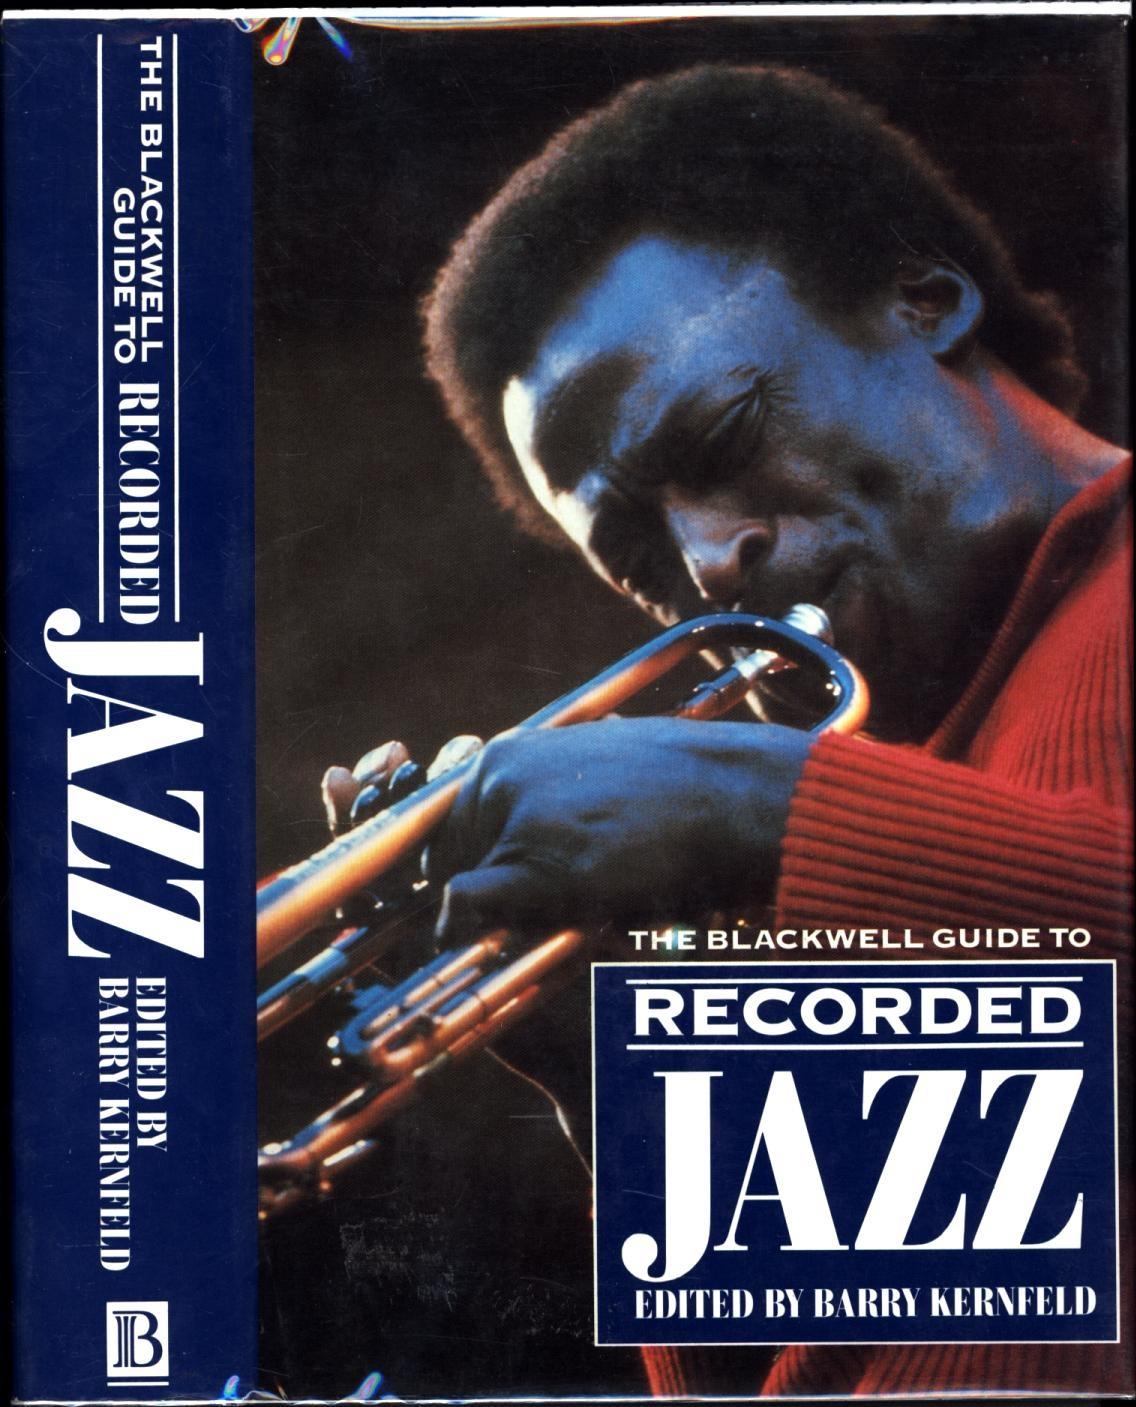 The Blackwell Guide to Recorded Jazz (Blackwell Guides)